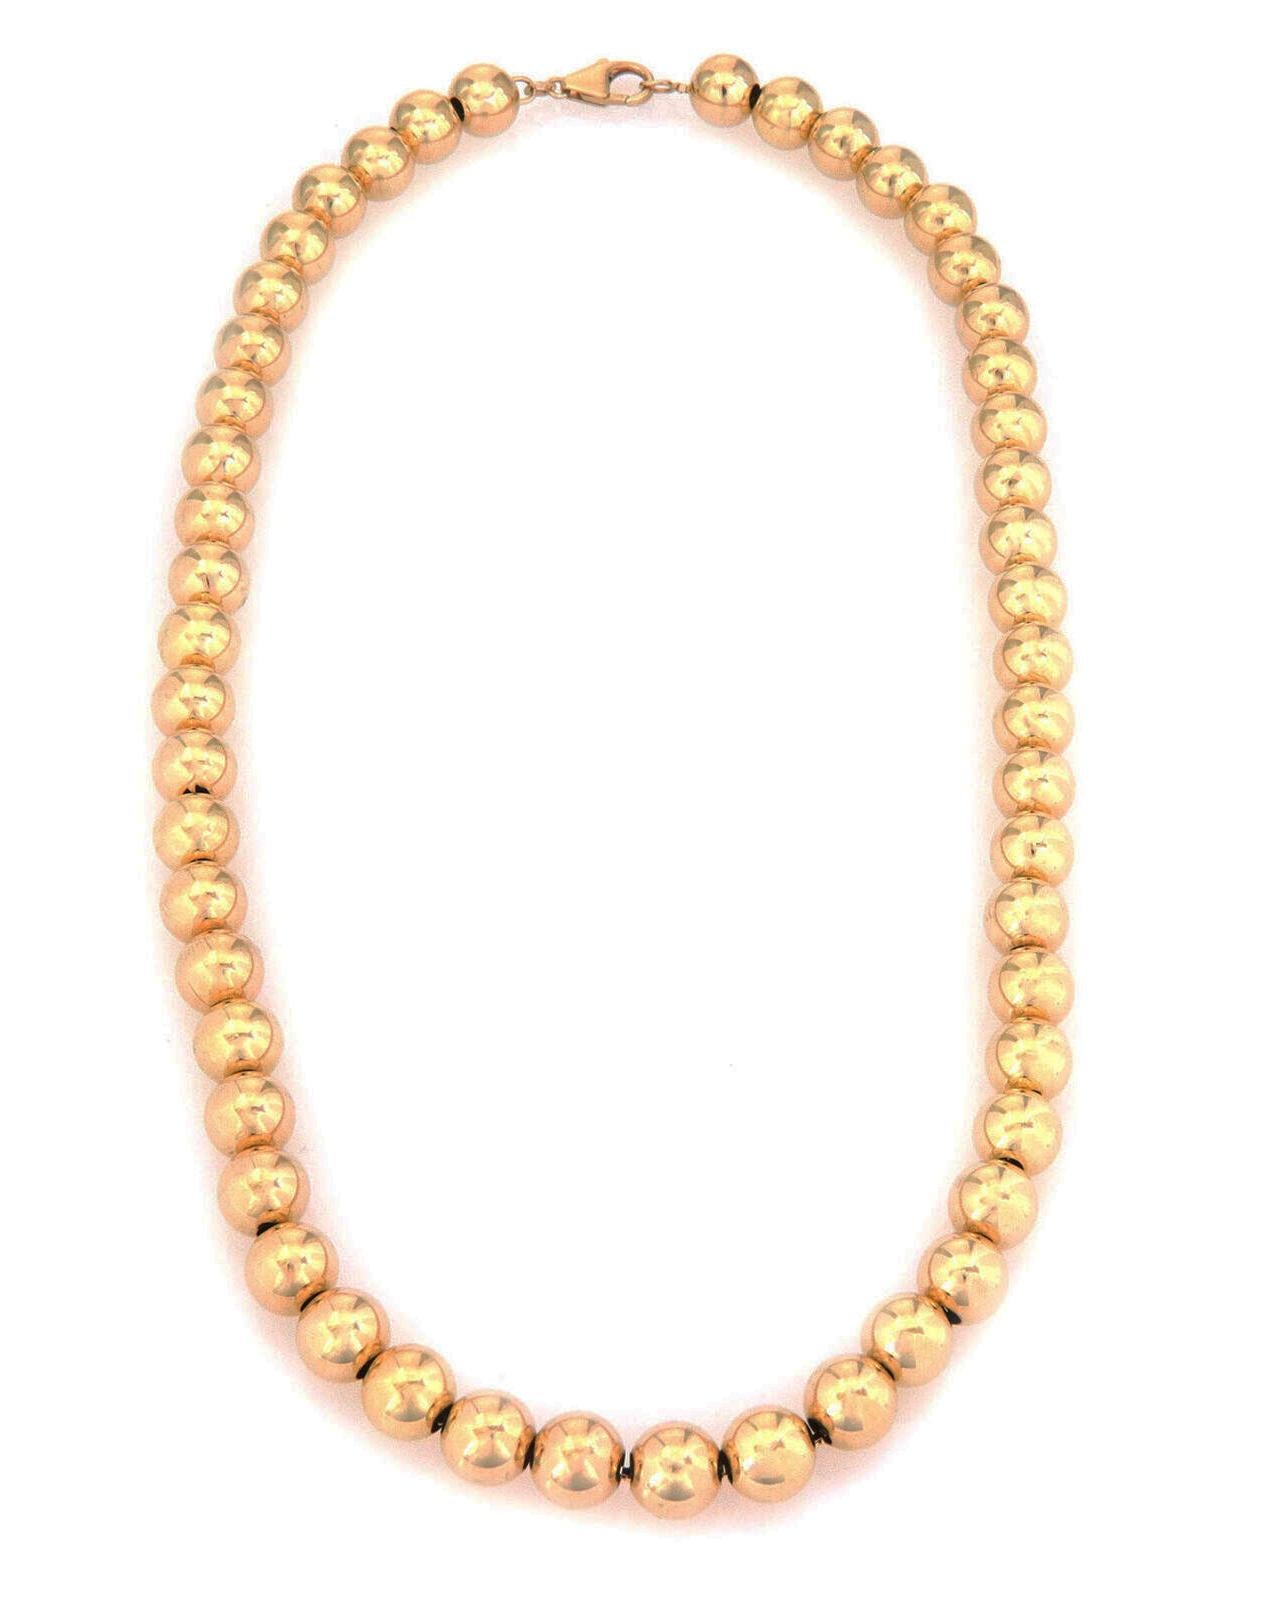 This is a lovely classic style beaded necklace, crafted from 14k yellow gold with a high polished finish featuring 9mm strung gold beads on a 1mm box link yellow gold chain. It secures with a lobster clasp and has the 14k gold content